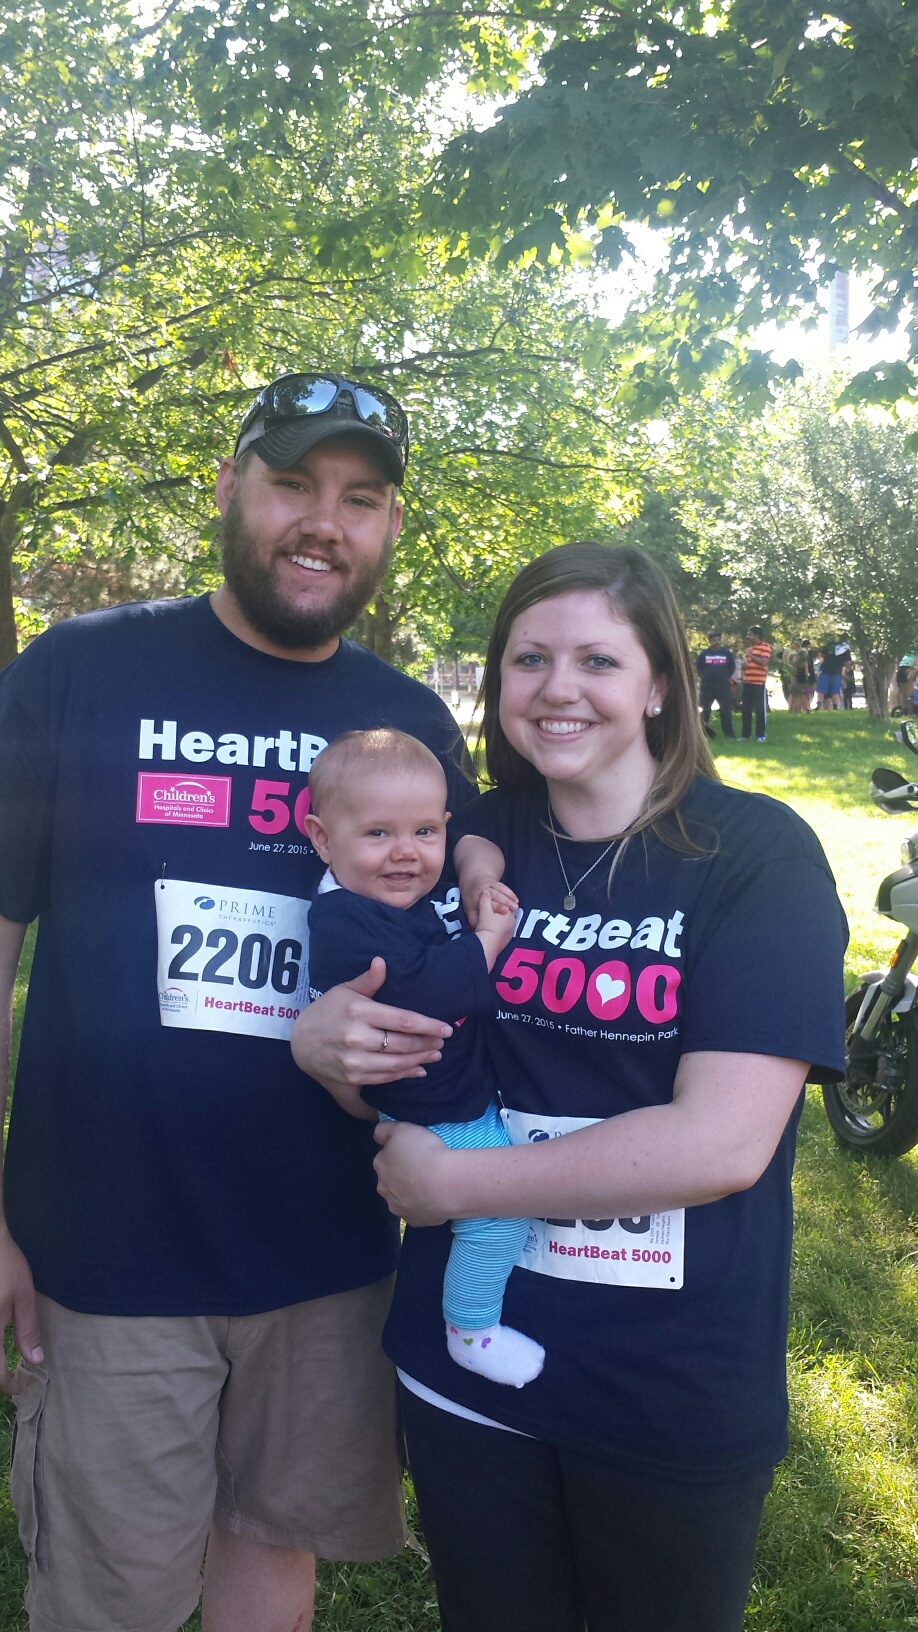 2015 at Heartbeat 5000